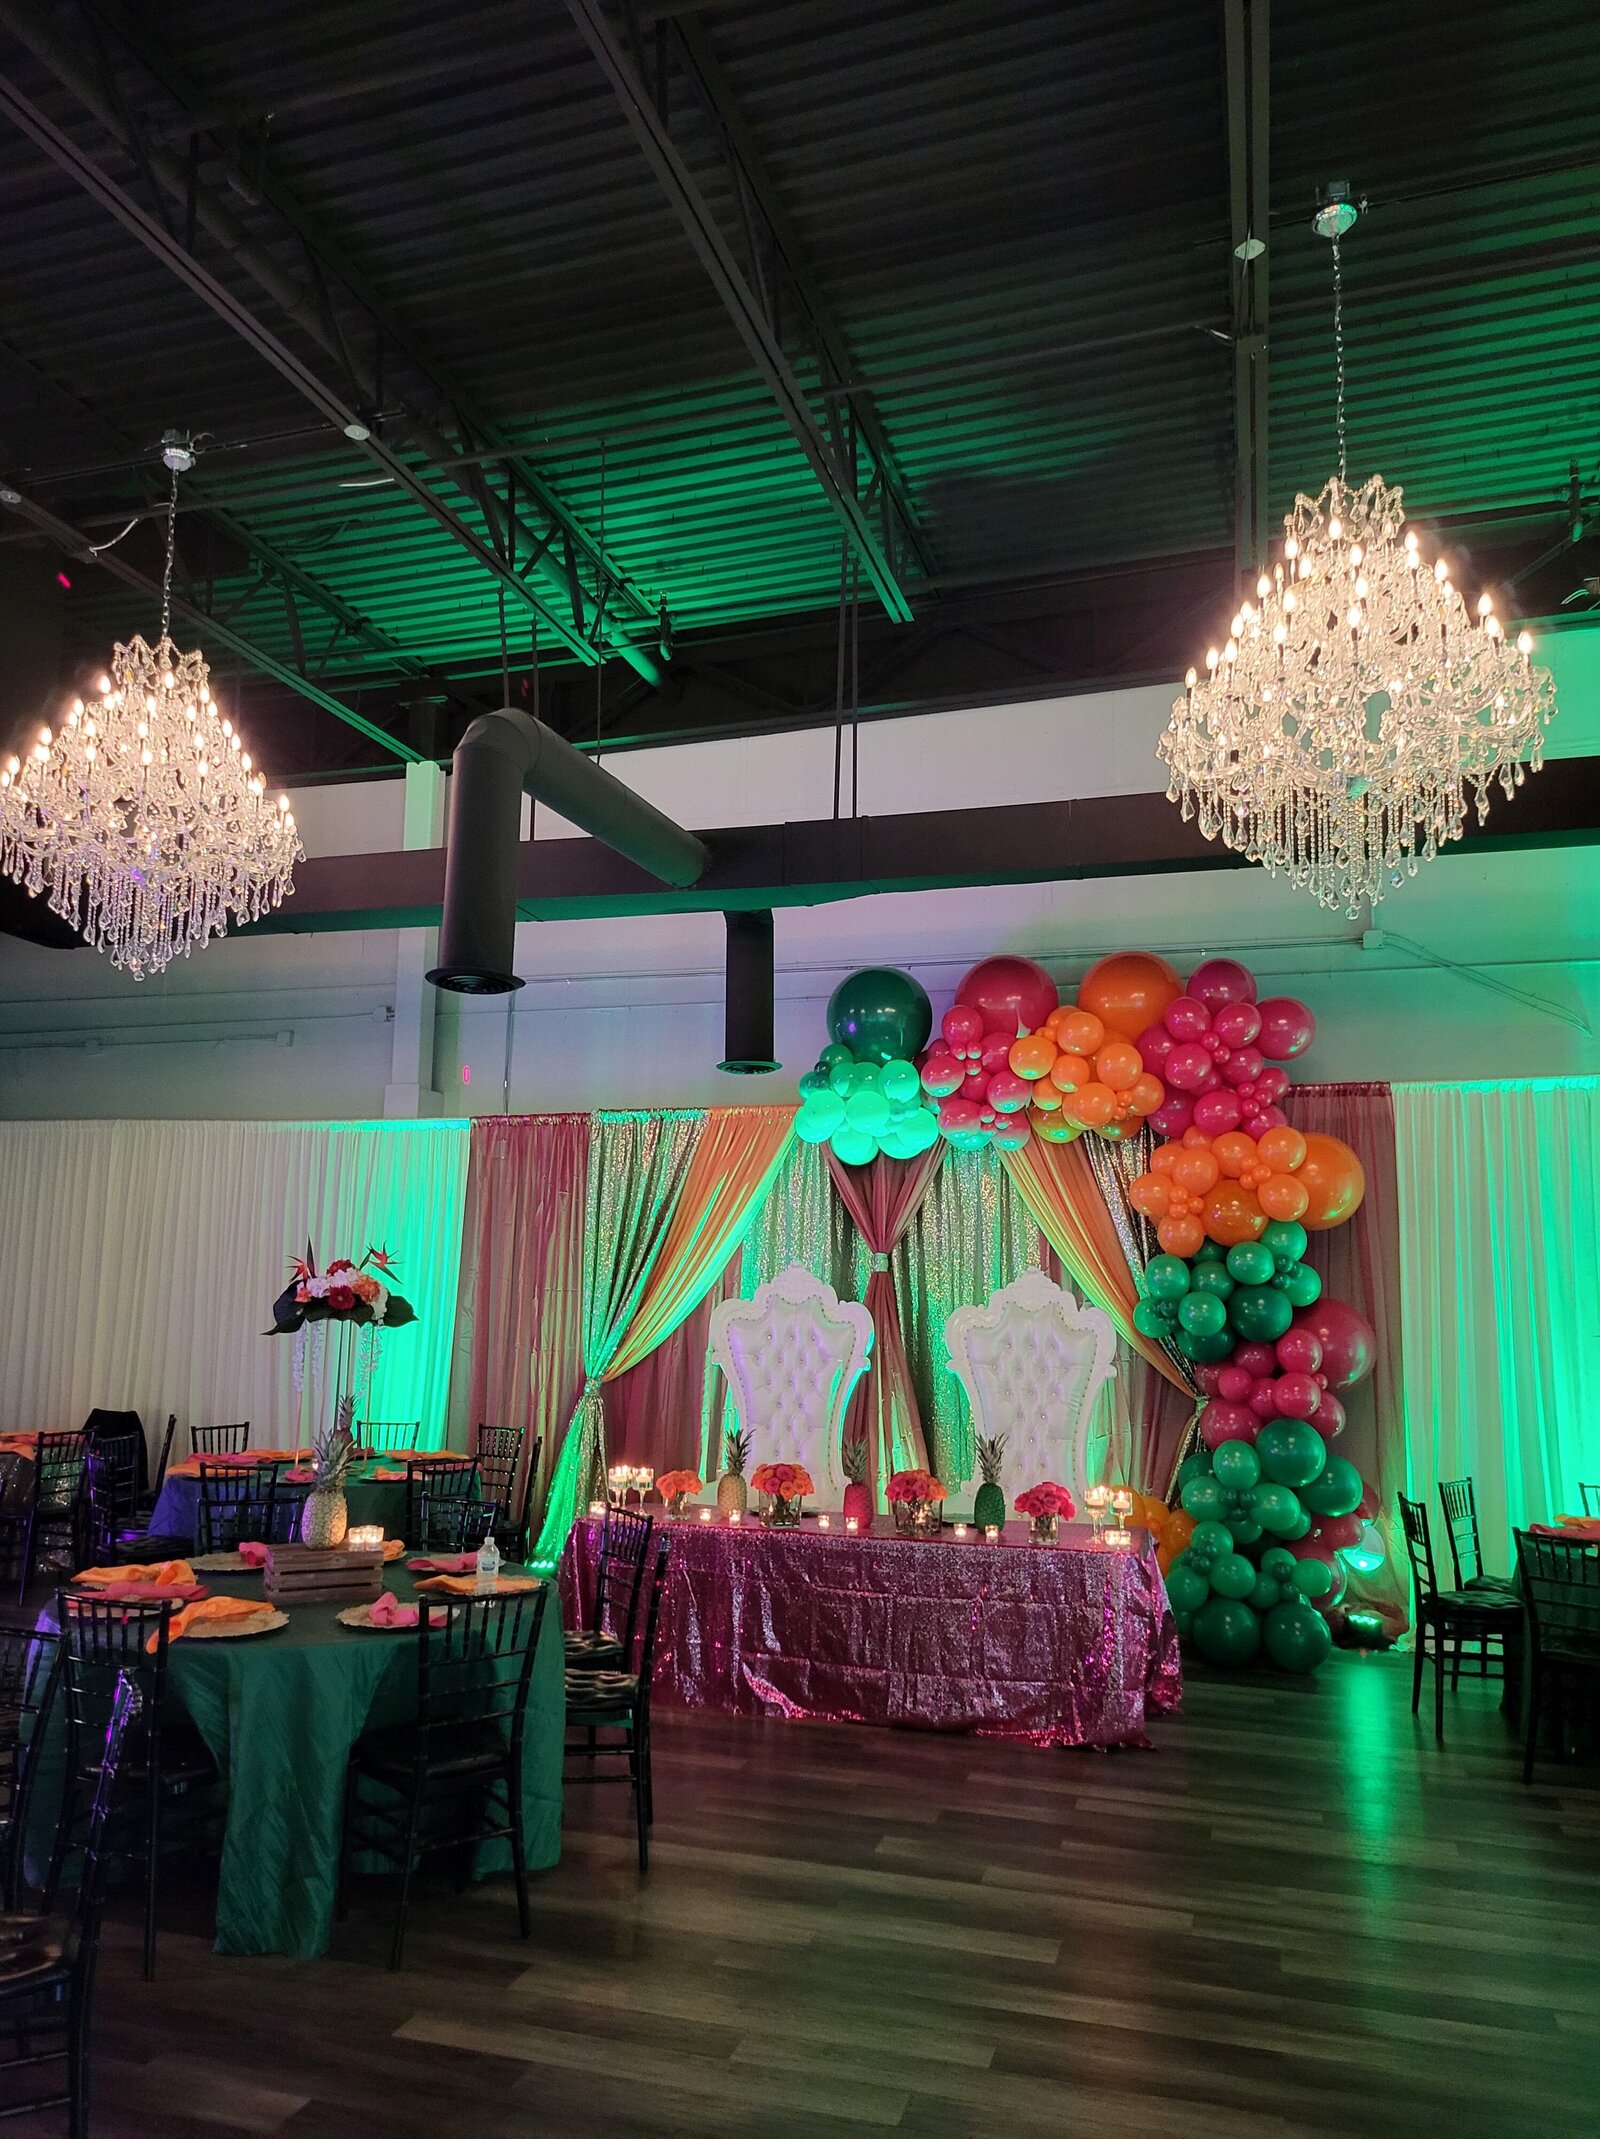 Birthday Party Grass Wall Rental in Detroit Metro Event Space 20211022_170148-min